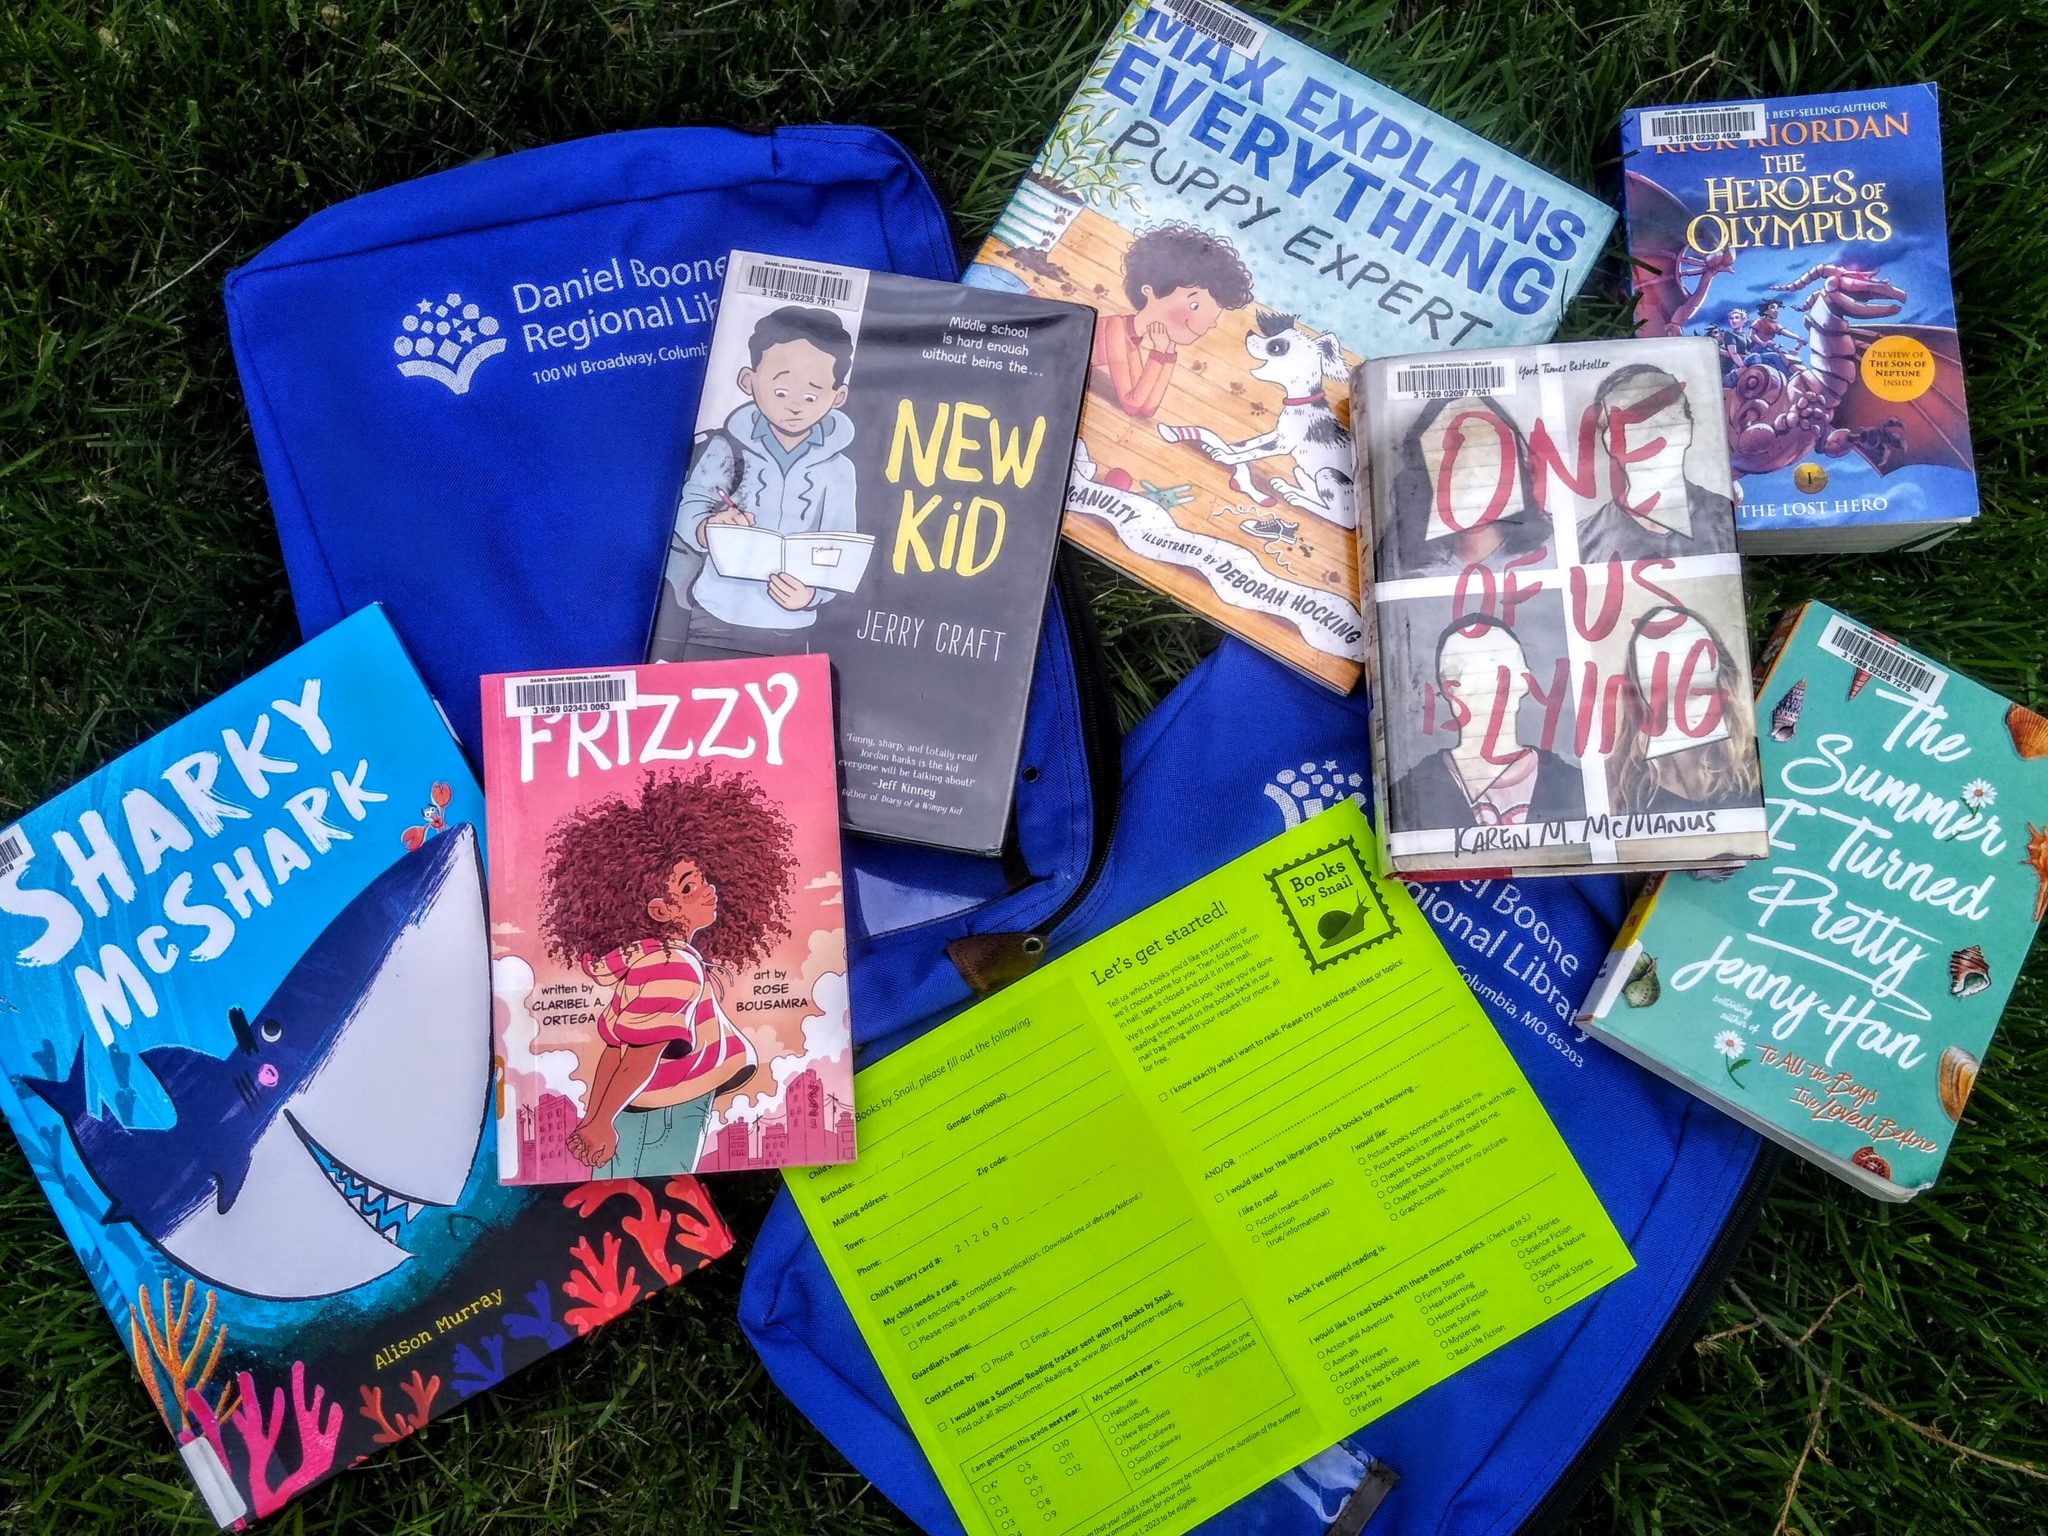 A selection of picture books, chapter books and graphic novels sit in the grass with two blue Books by Snail bags and a sign-up sheet. 